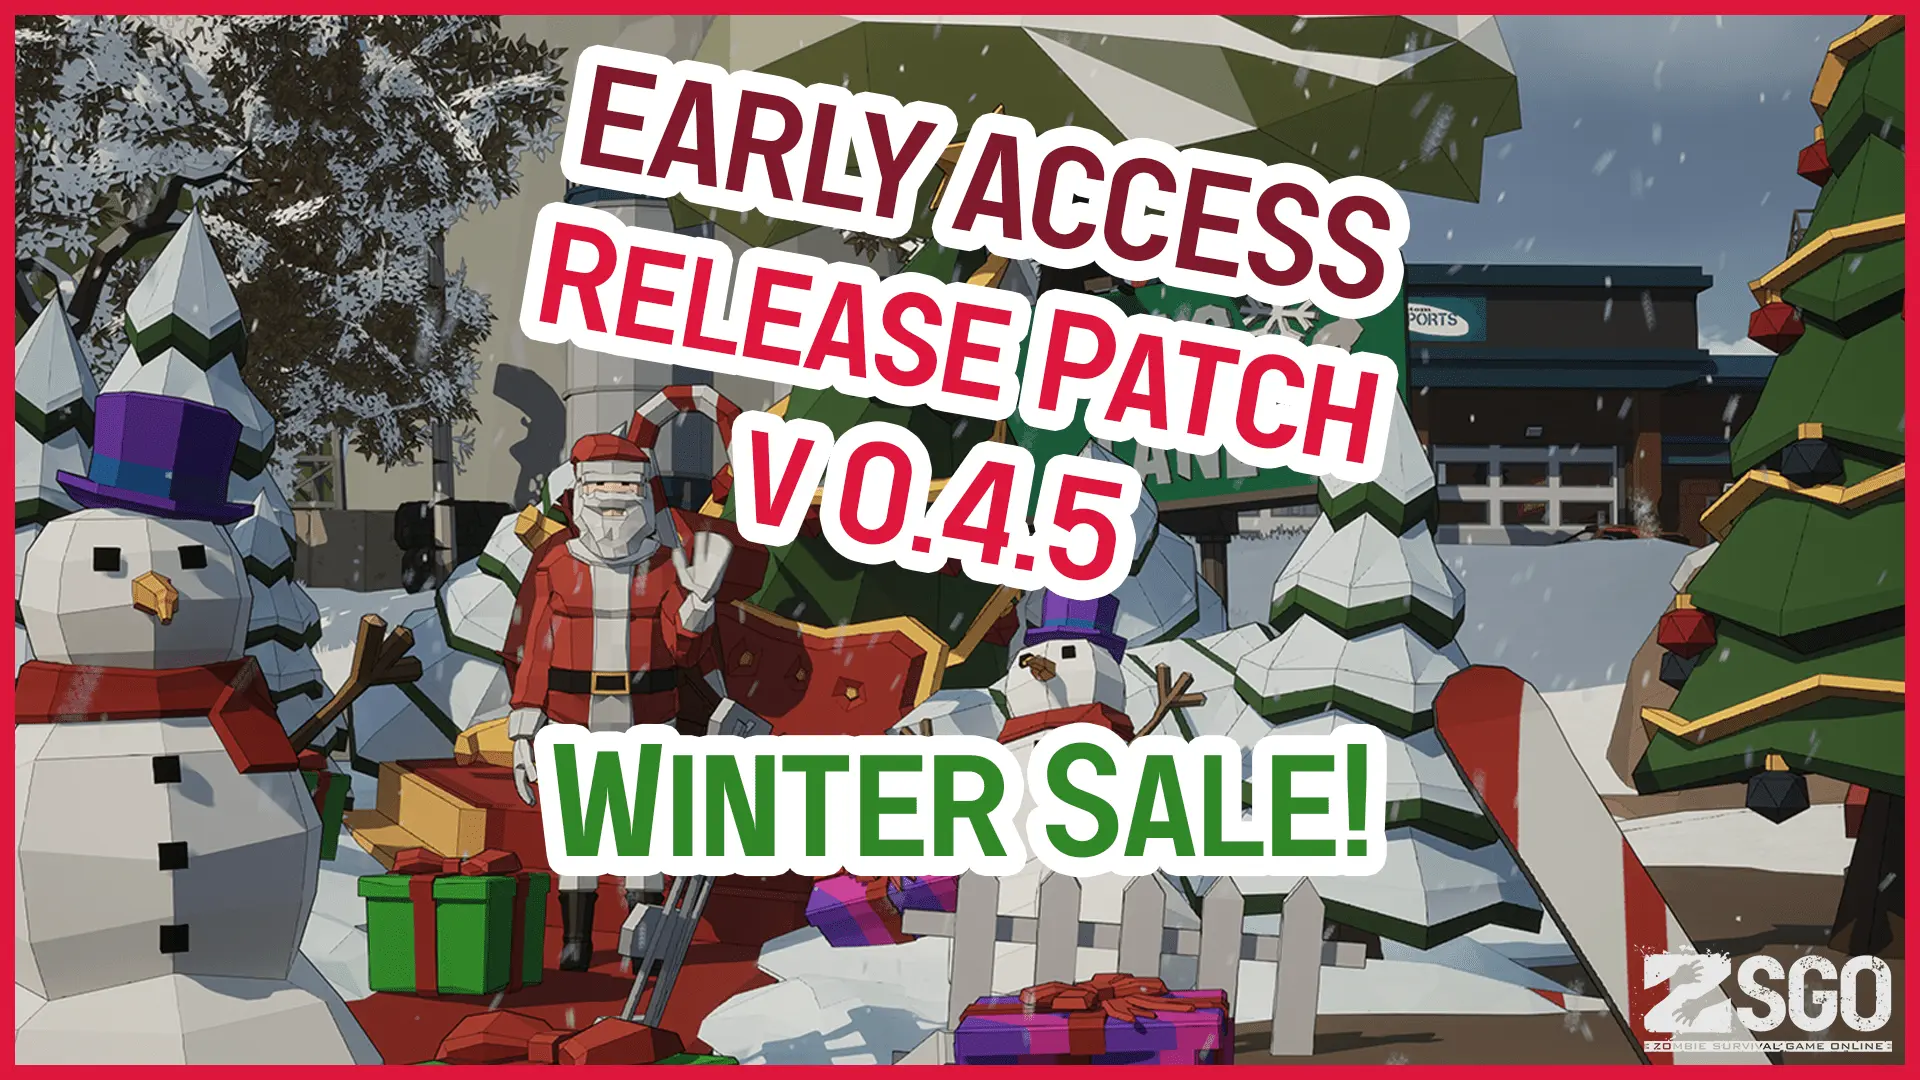 The Early Access Release Patch version 0.4.5 winter sale.